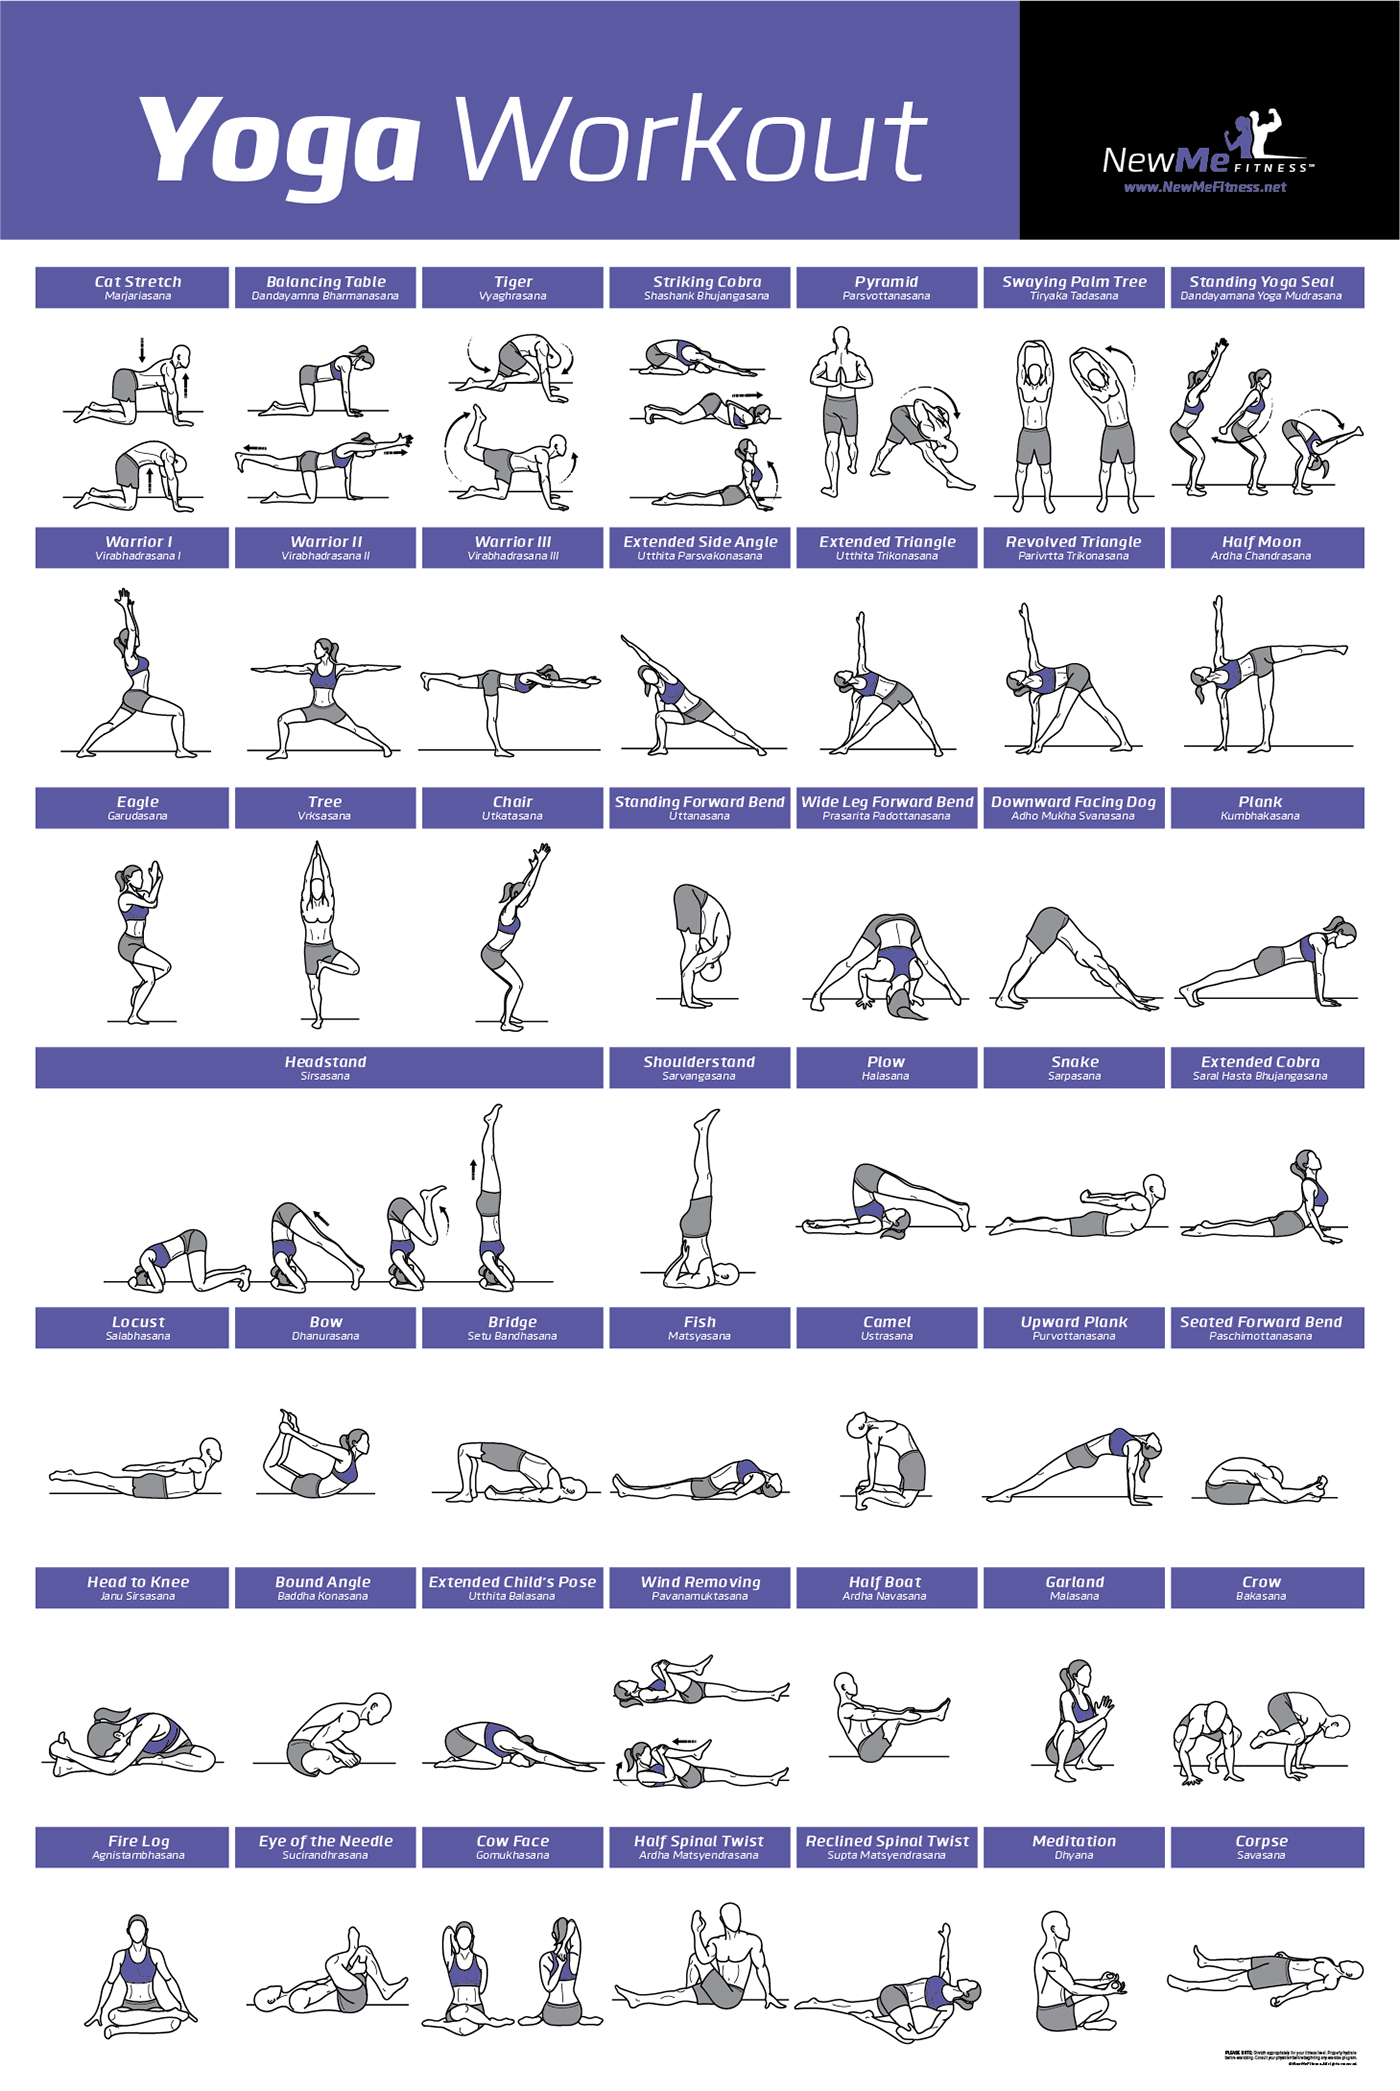 New Me Fitness - Posters on Behance